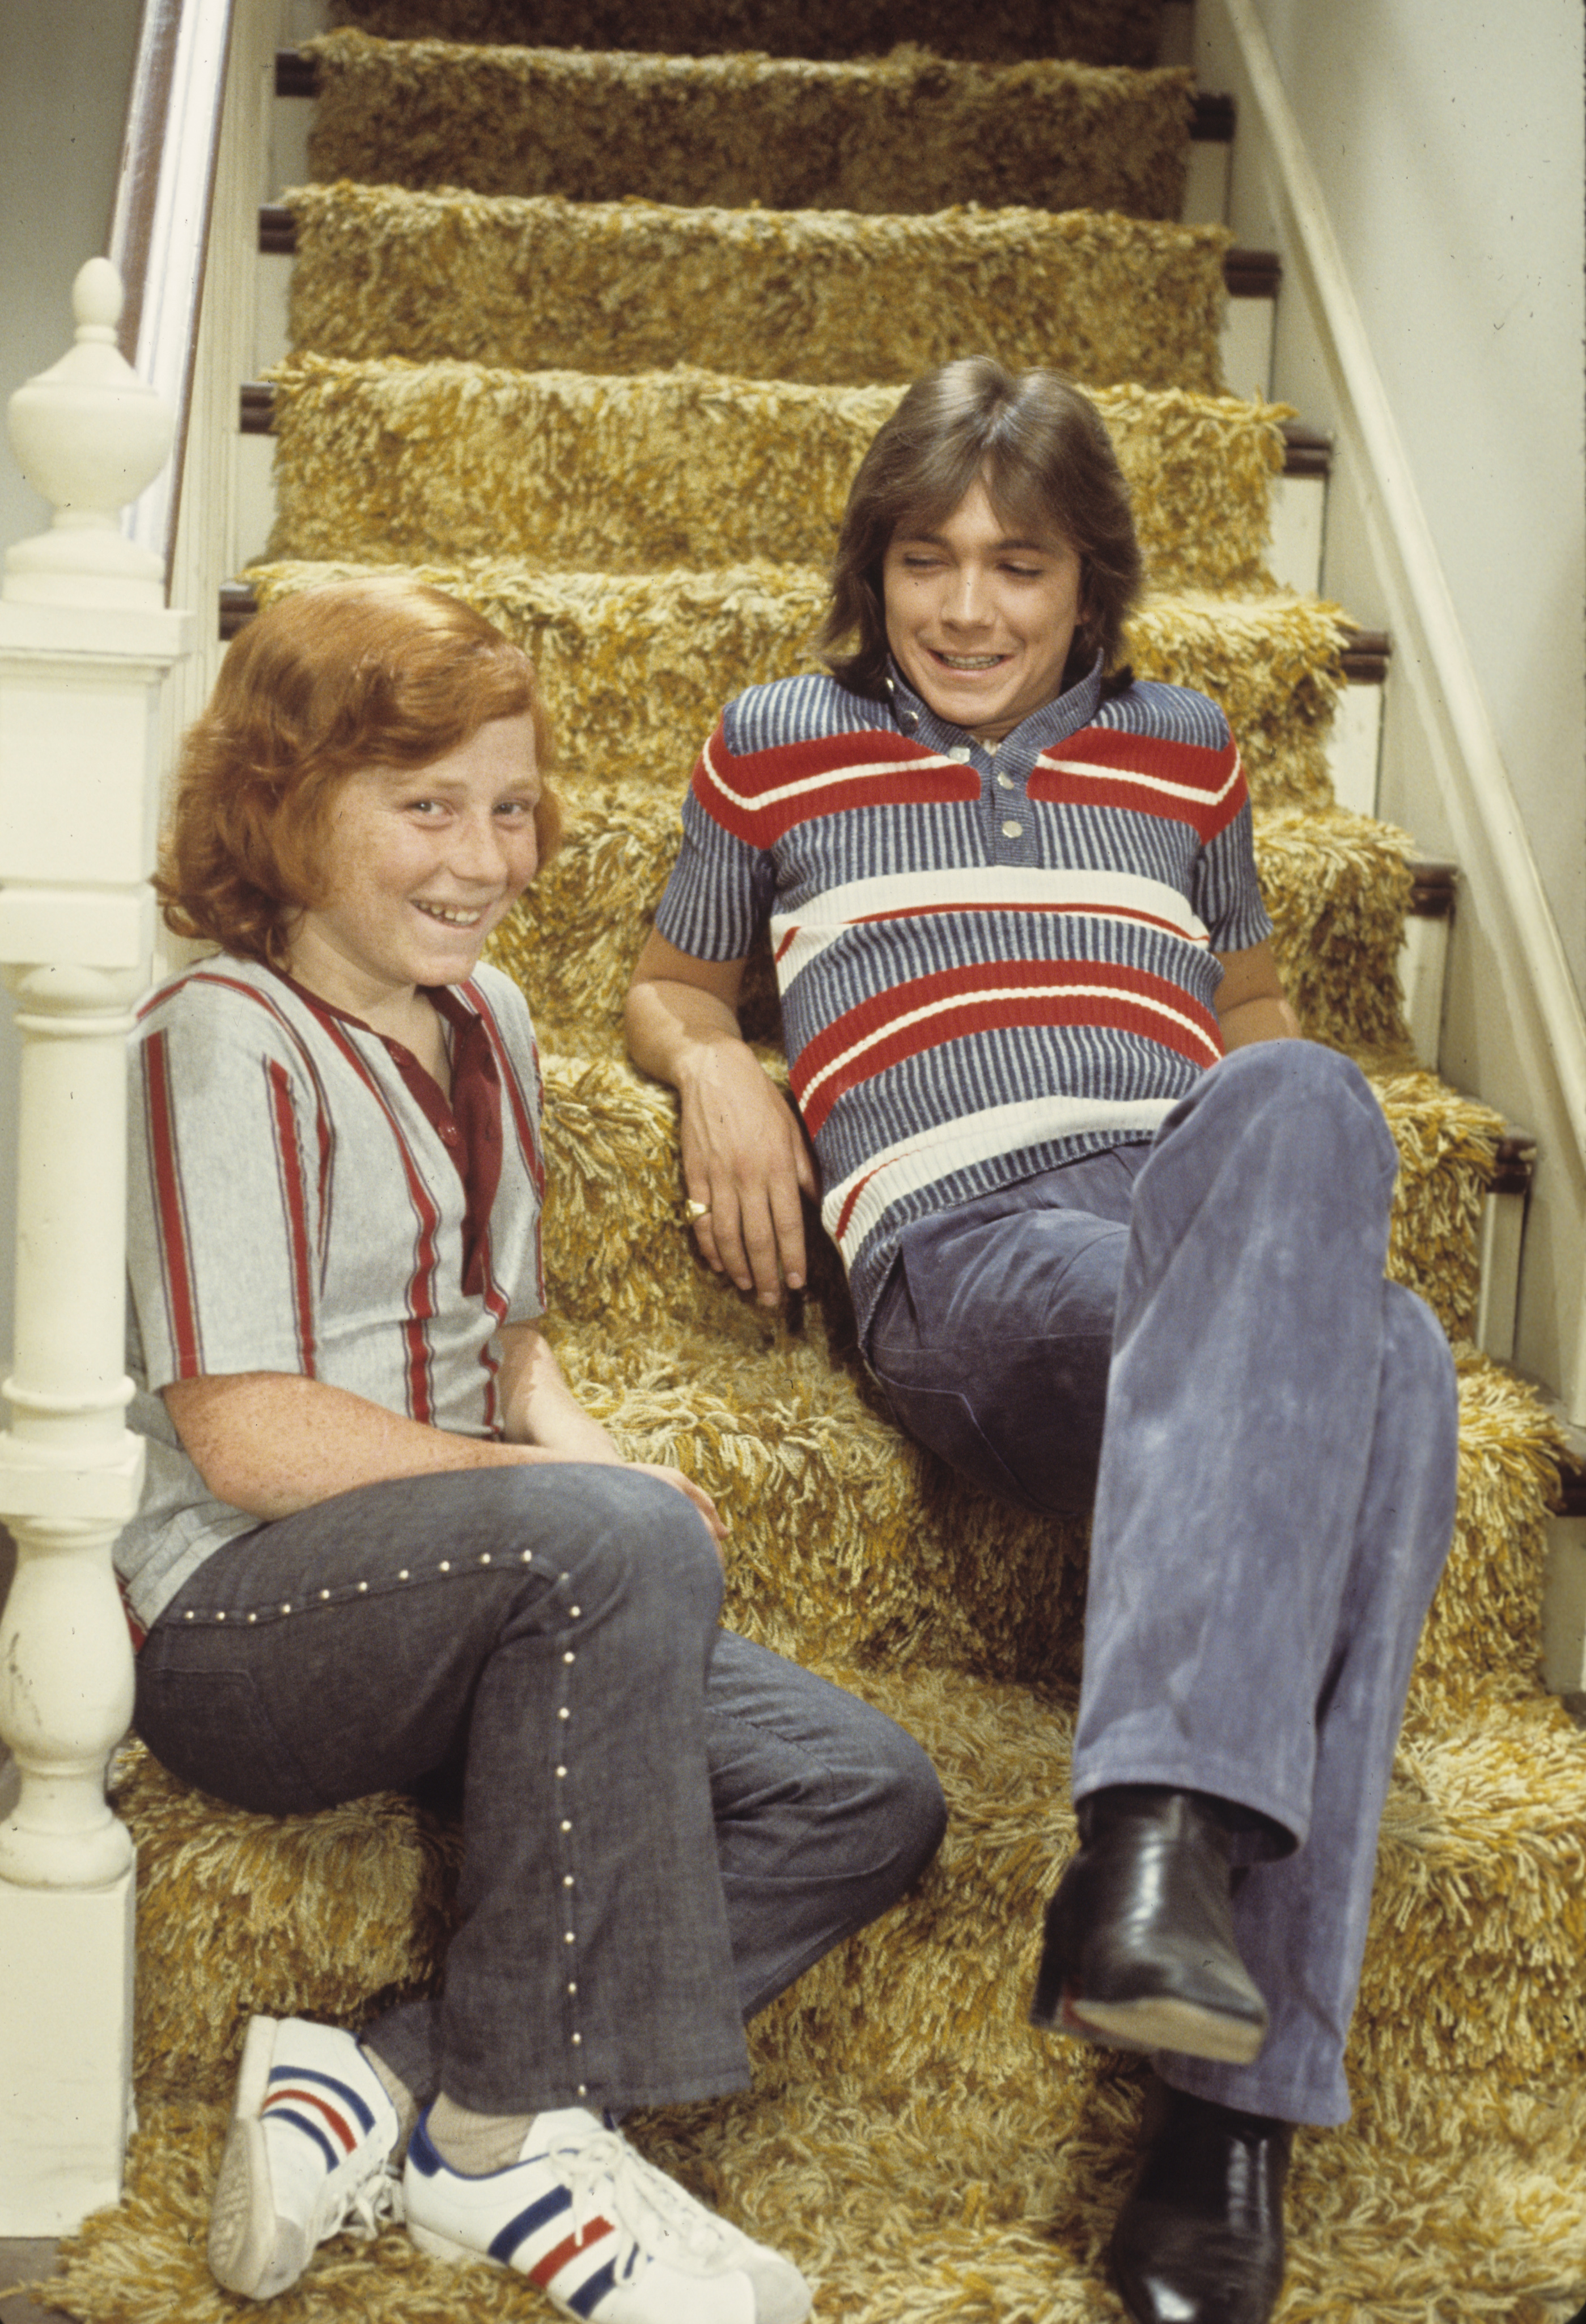 Two of the "The Partridge Family" actors on set in 1972. | Source: Getty Images